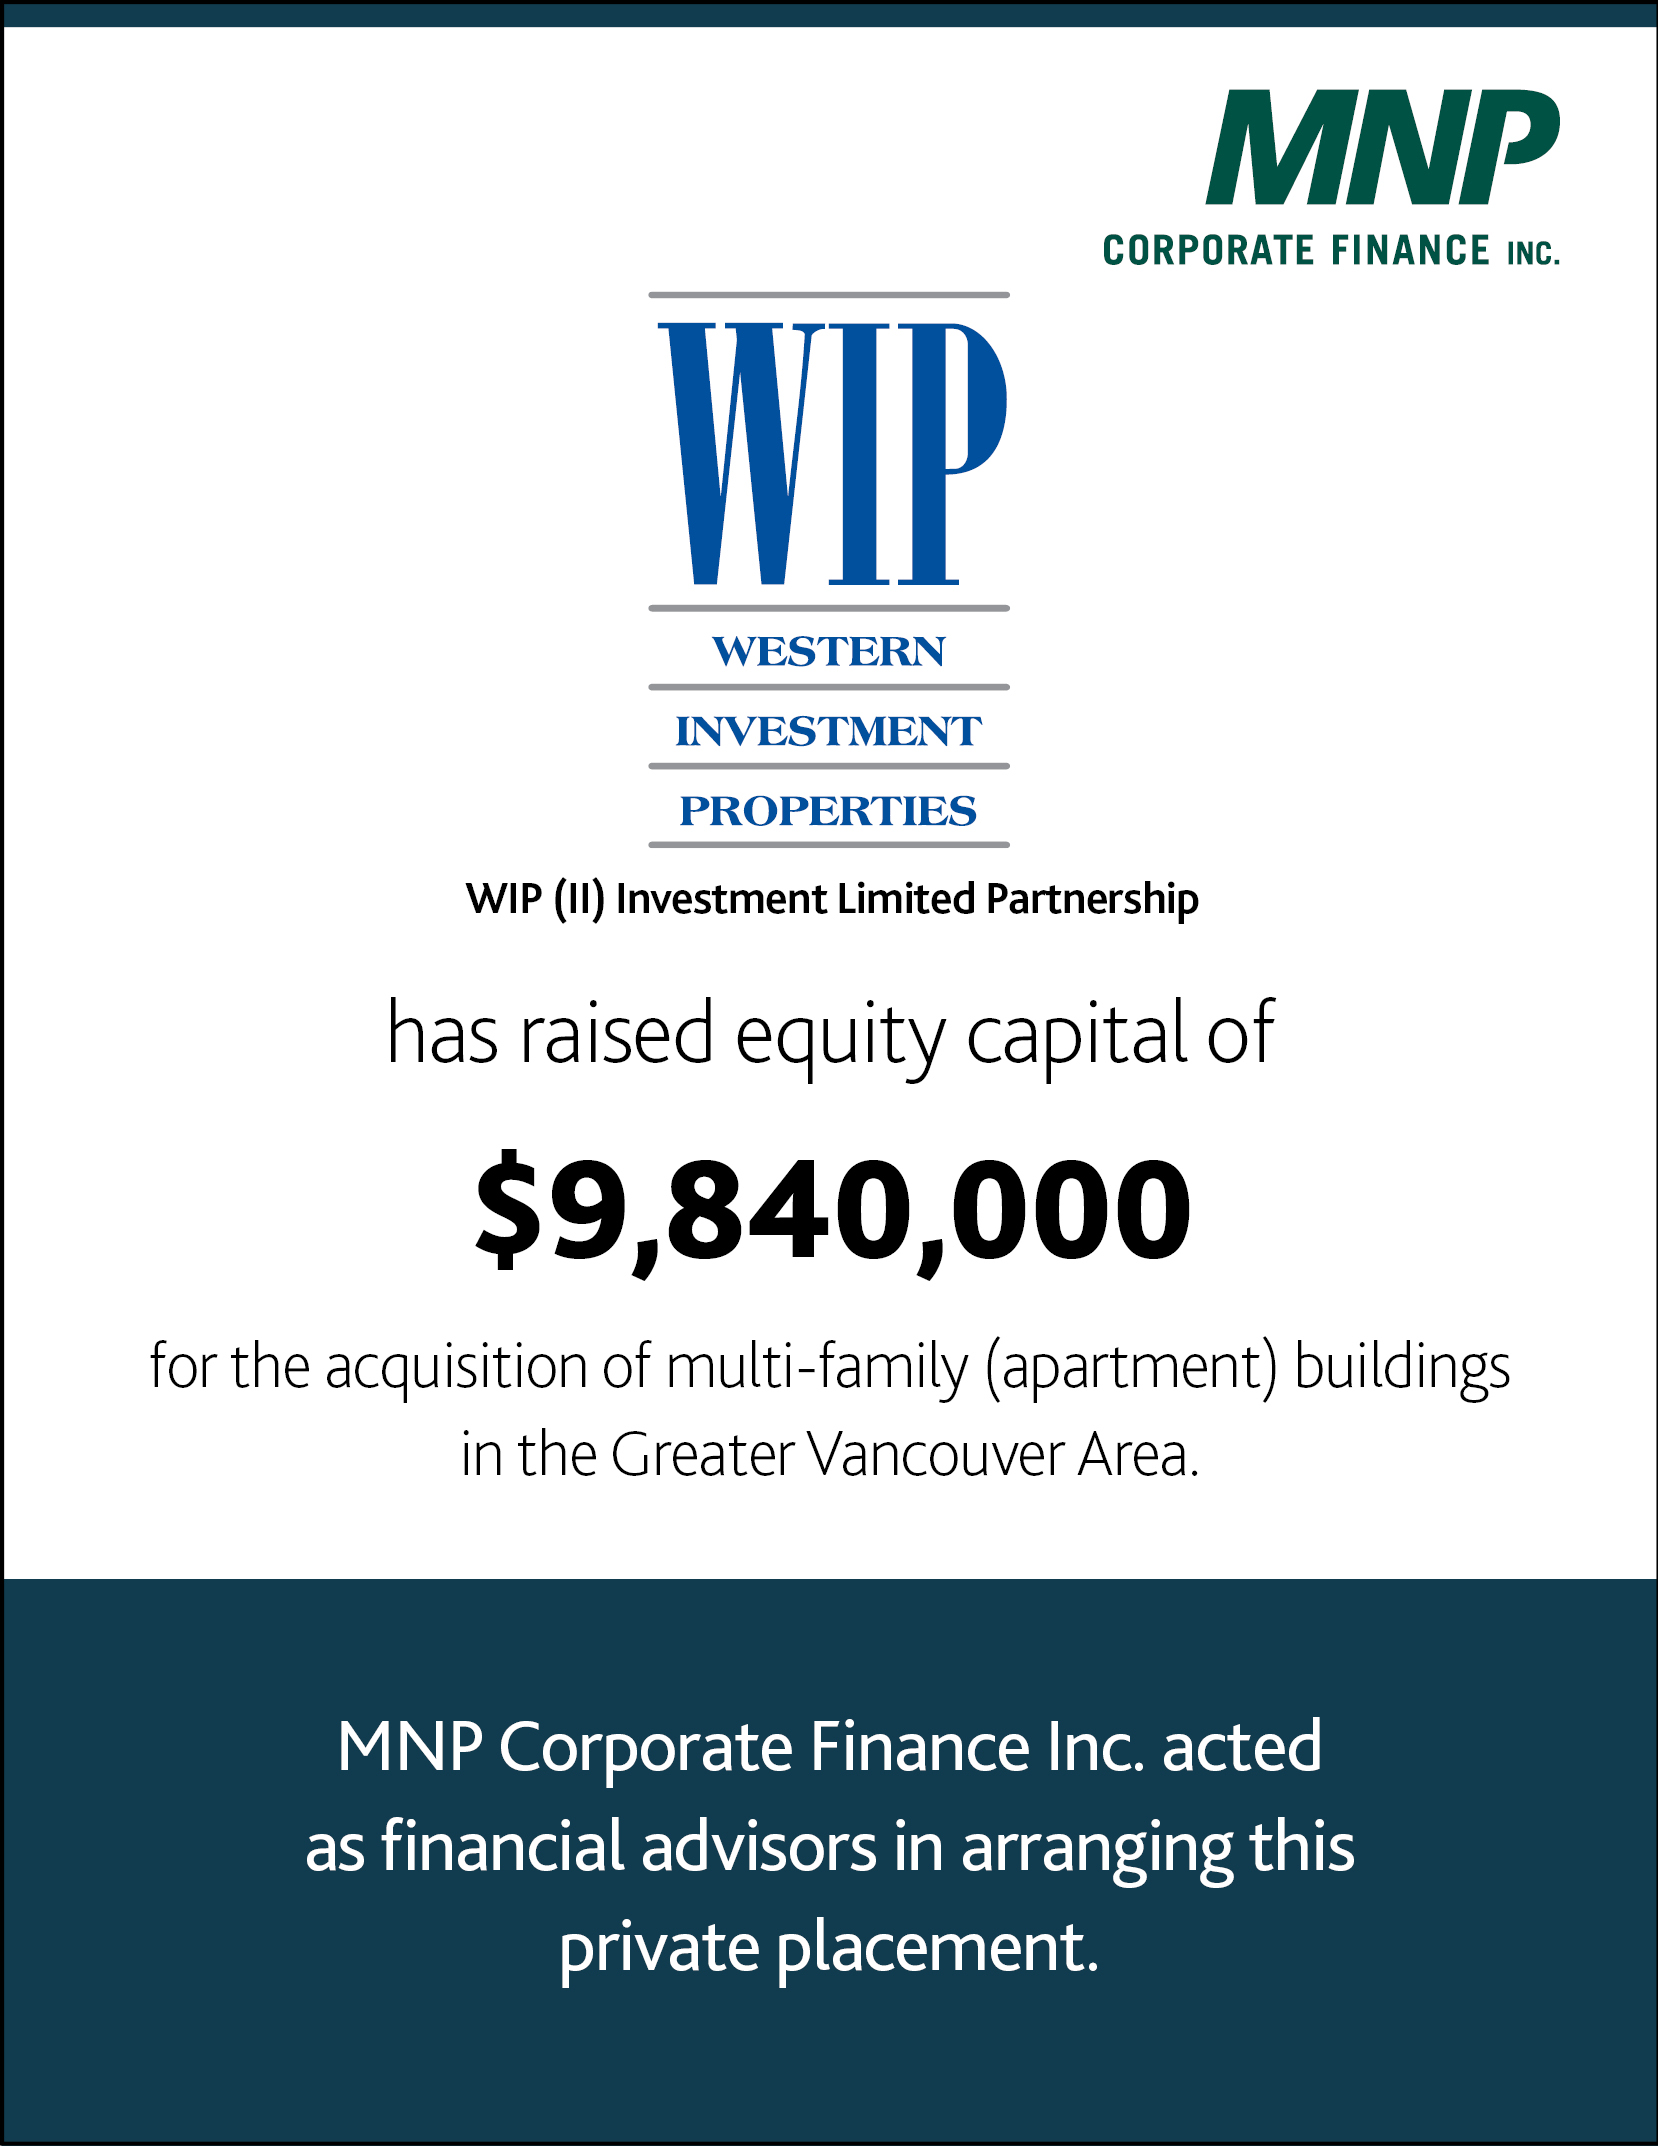 WIP (II) Investment LP has raised equity capital of $9,840,000 for the acquisition of multi-family (apartments) buildings in the Greater Vancouver Area.